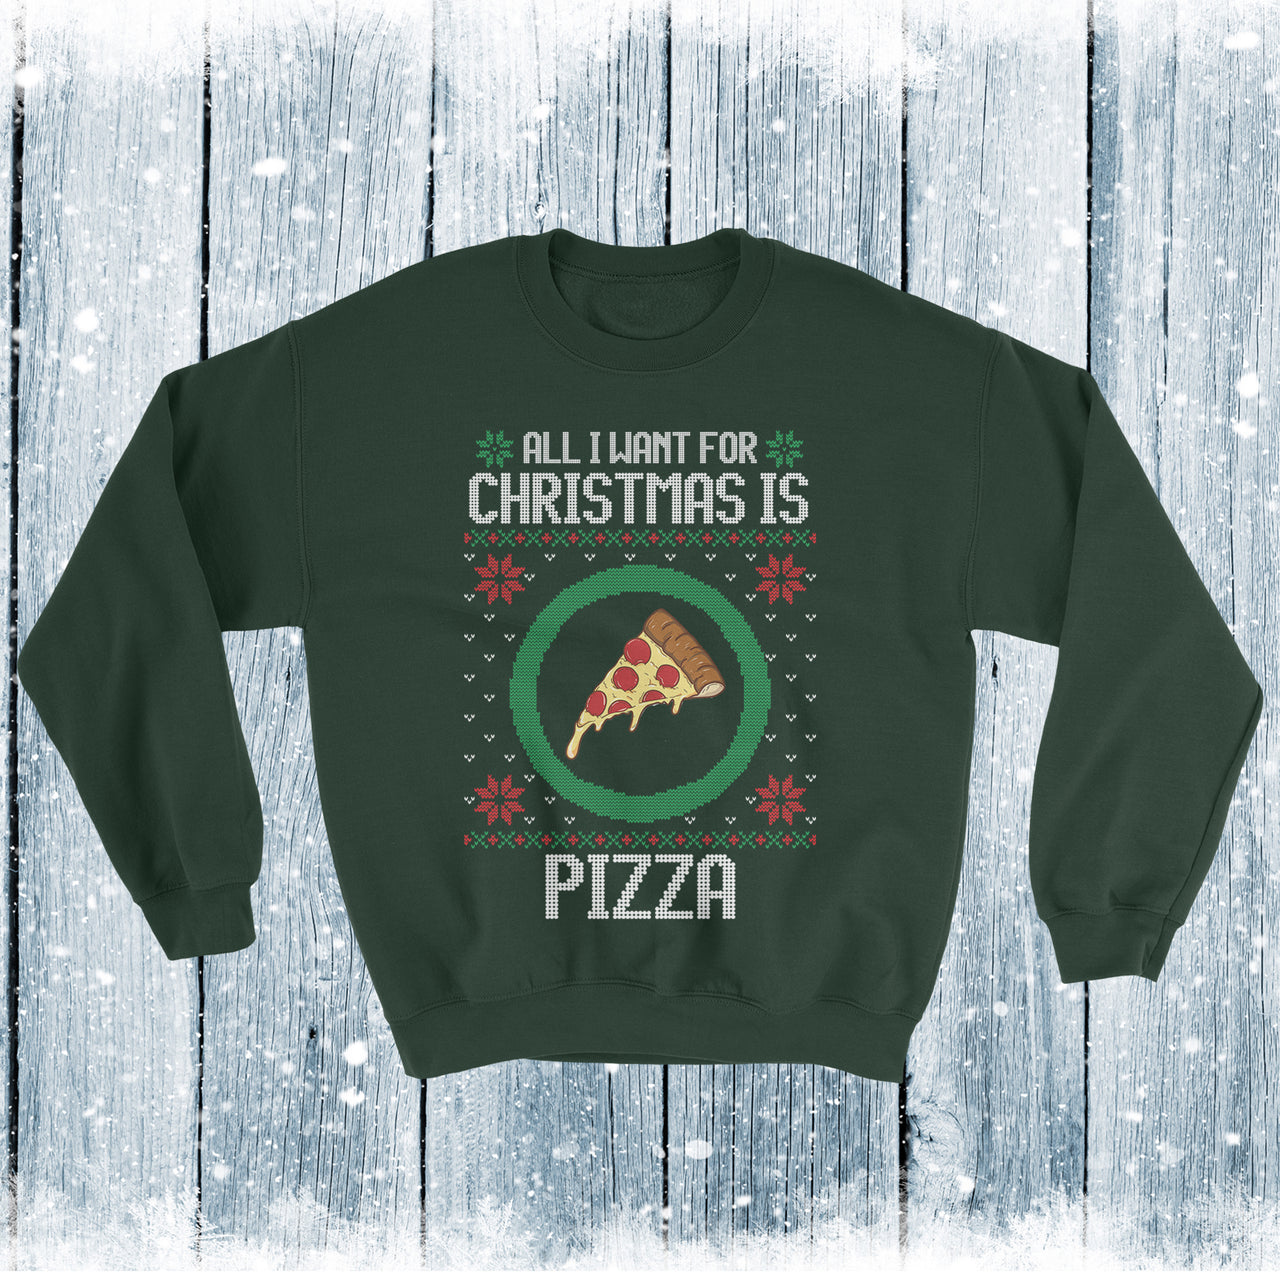 All I Want For Christmas is Pizza - Ugly Christmas Sweater